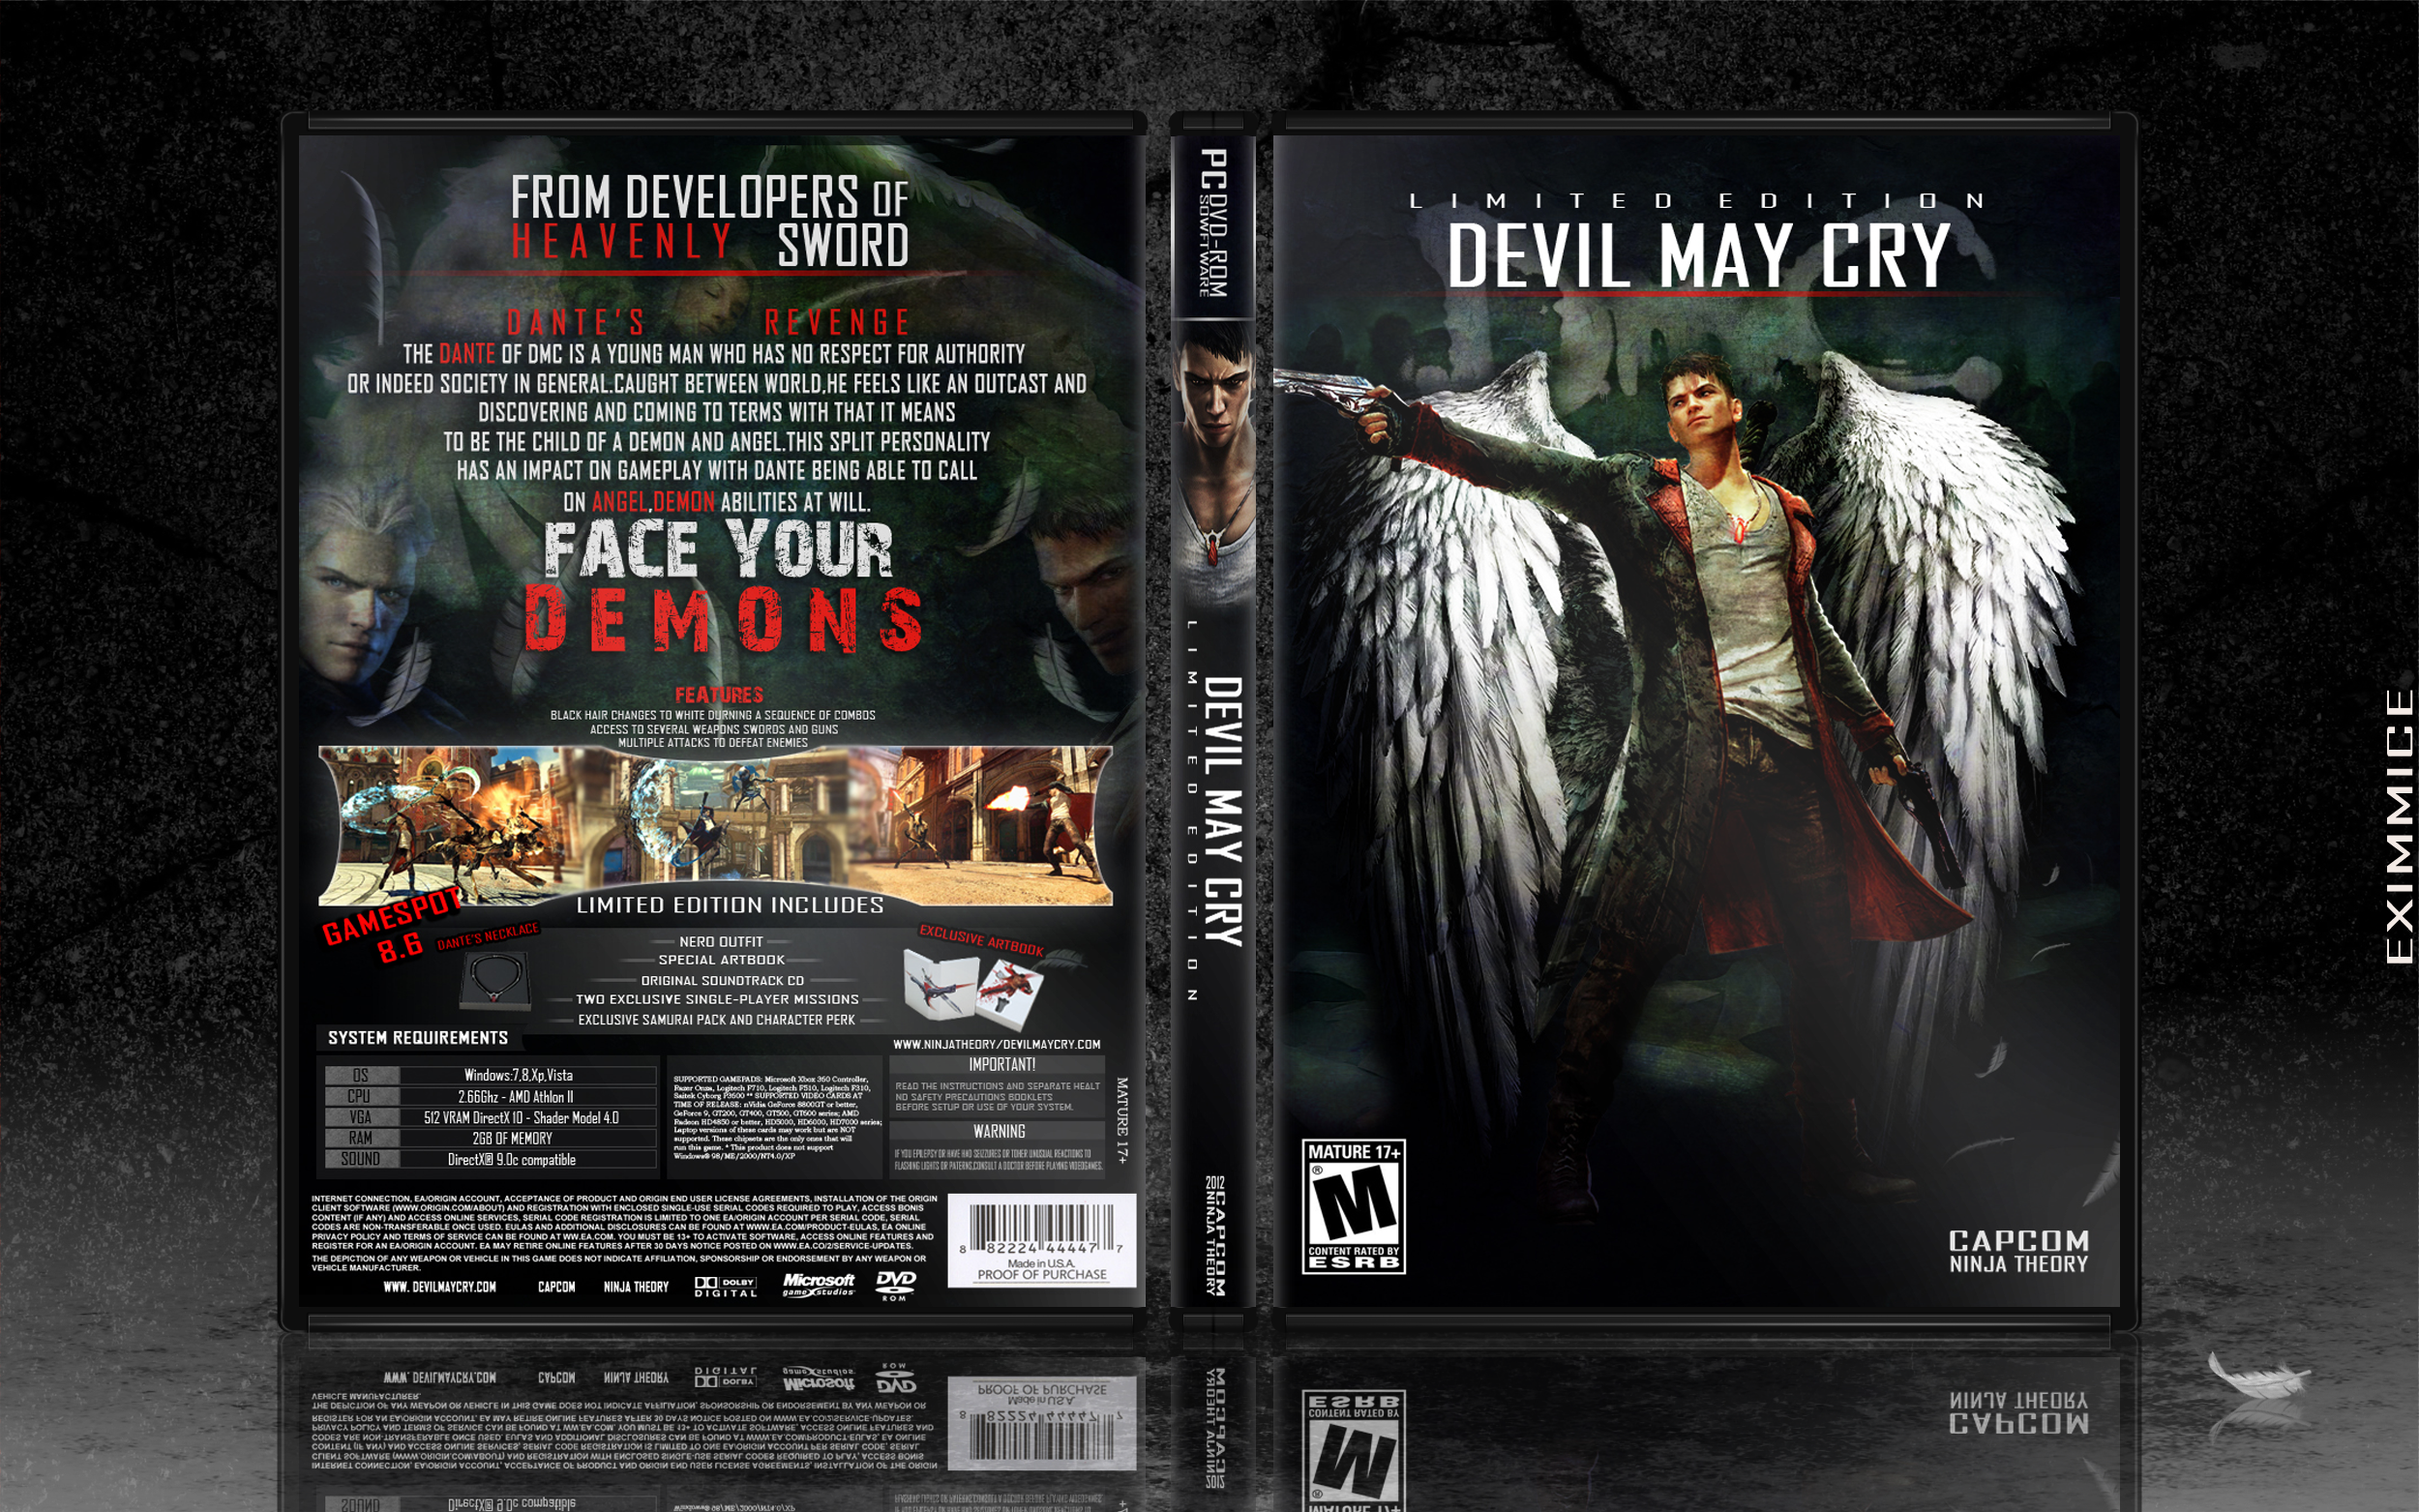 DMC: Devil May Cry Limited Edition box cover